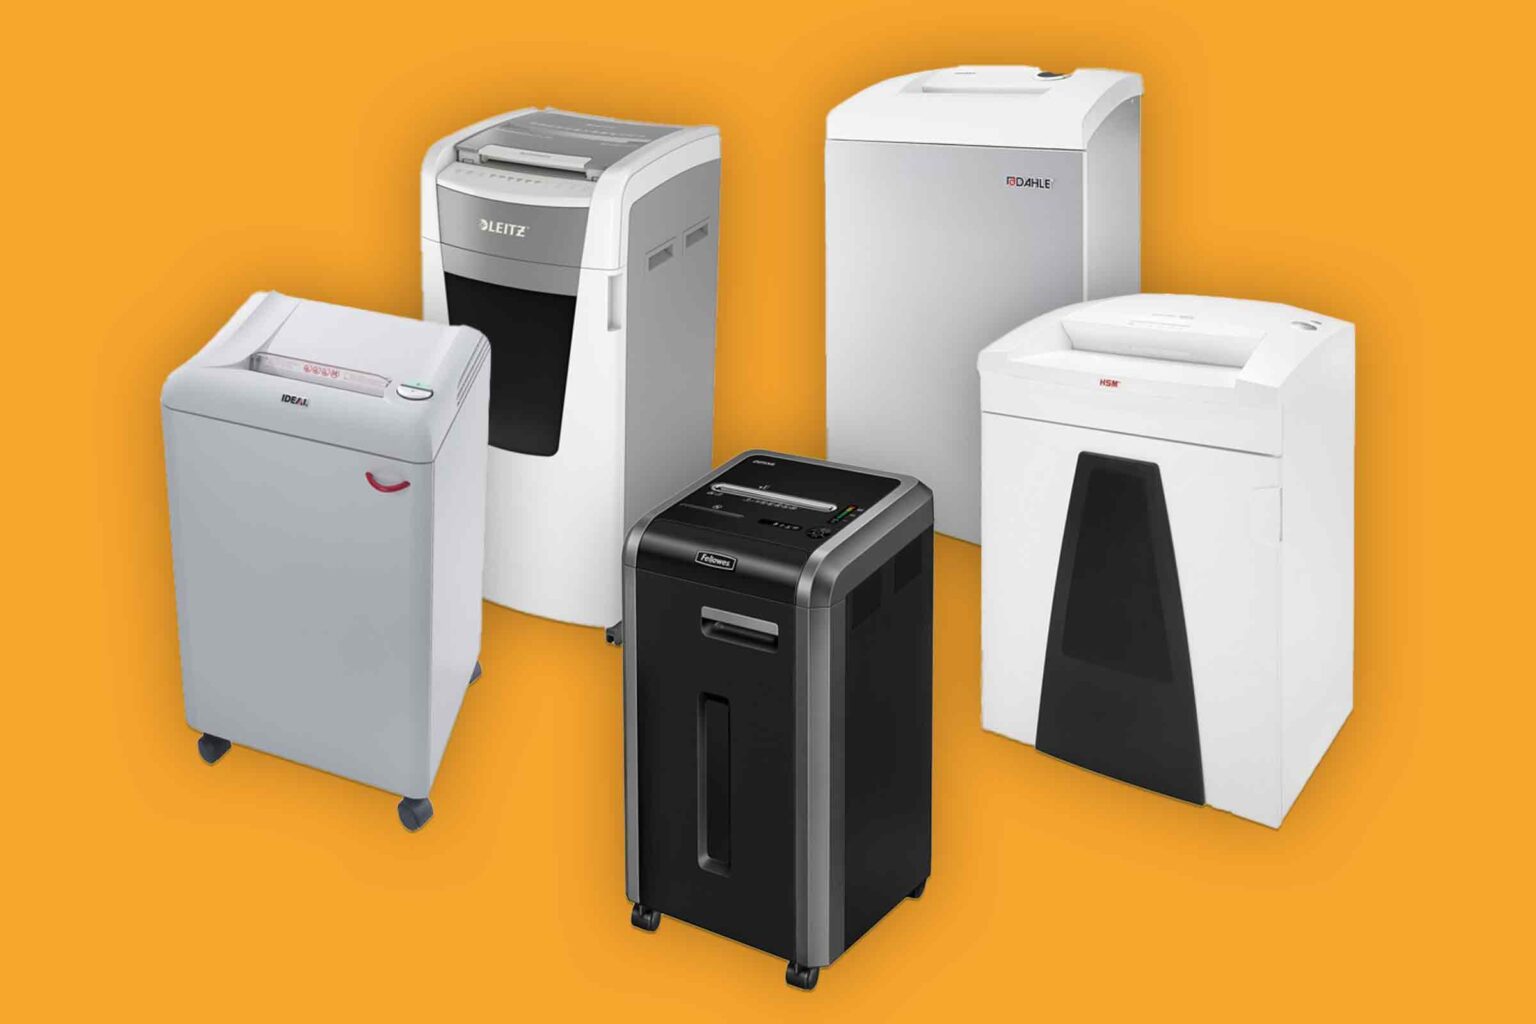 Heavy Duty Shredders Compared | Best Products Compared For Business